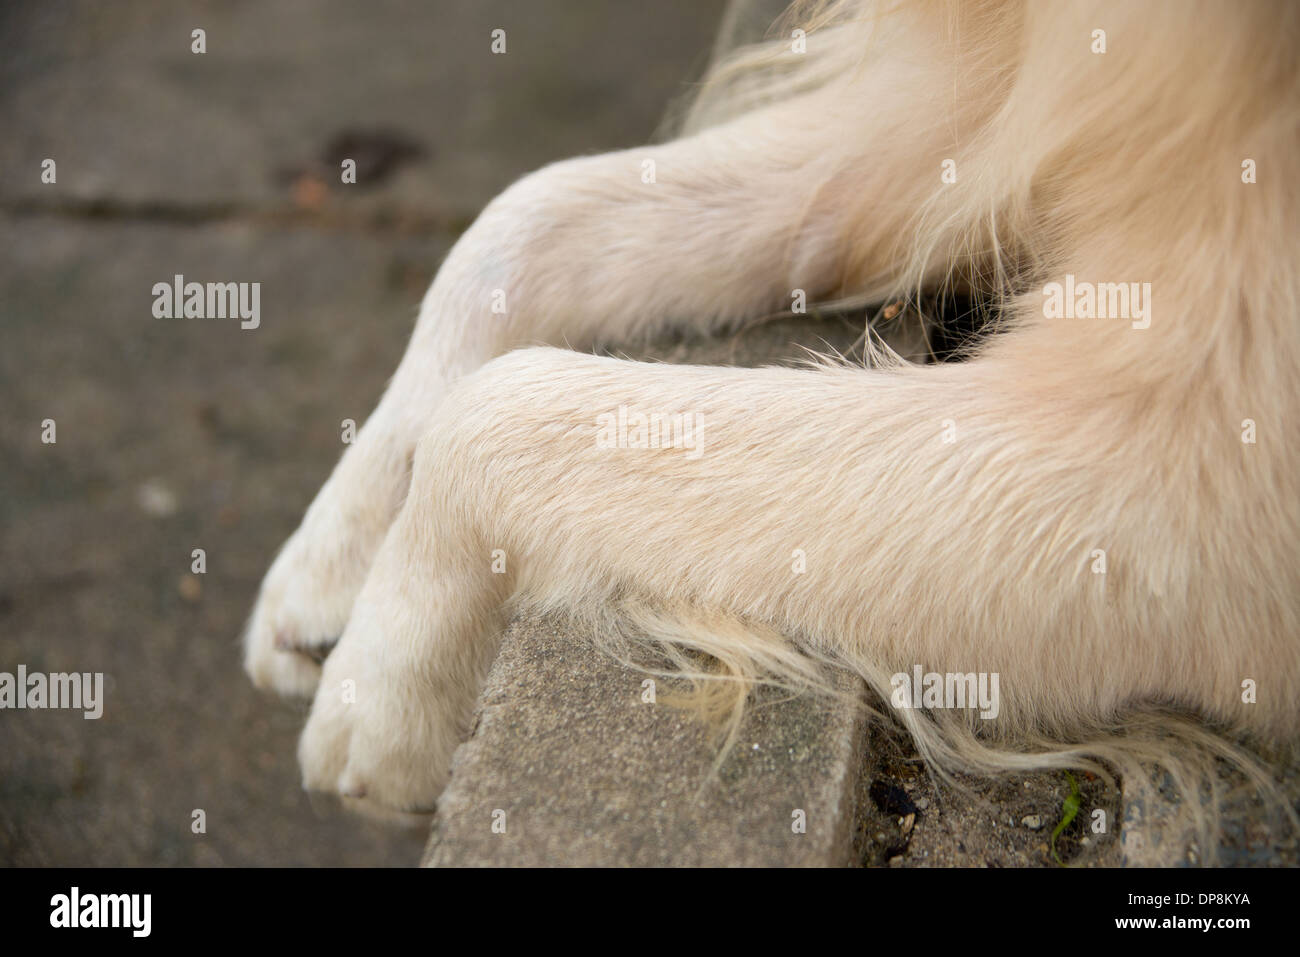 Golden retriever legs, dog legs and paws resting over pavement Stock Photo